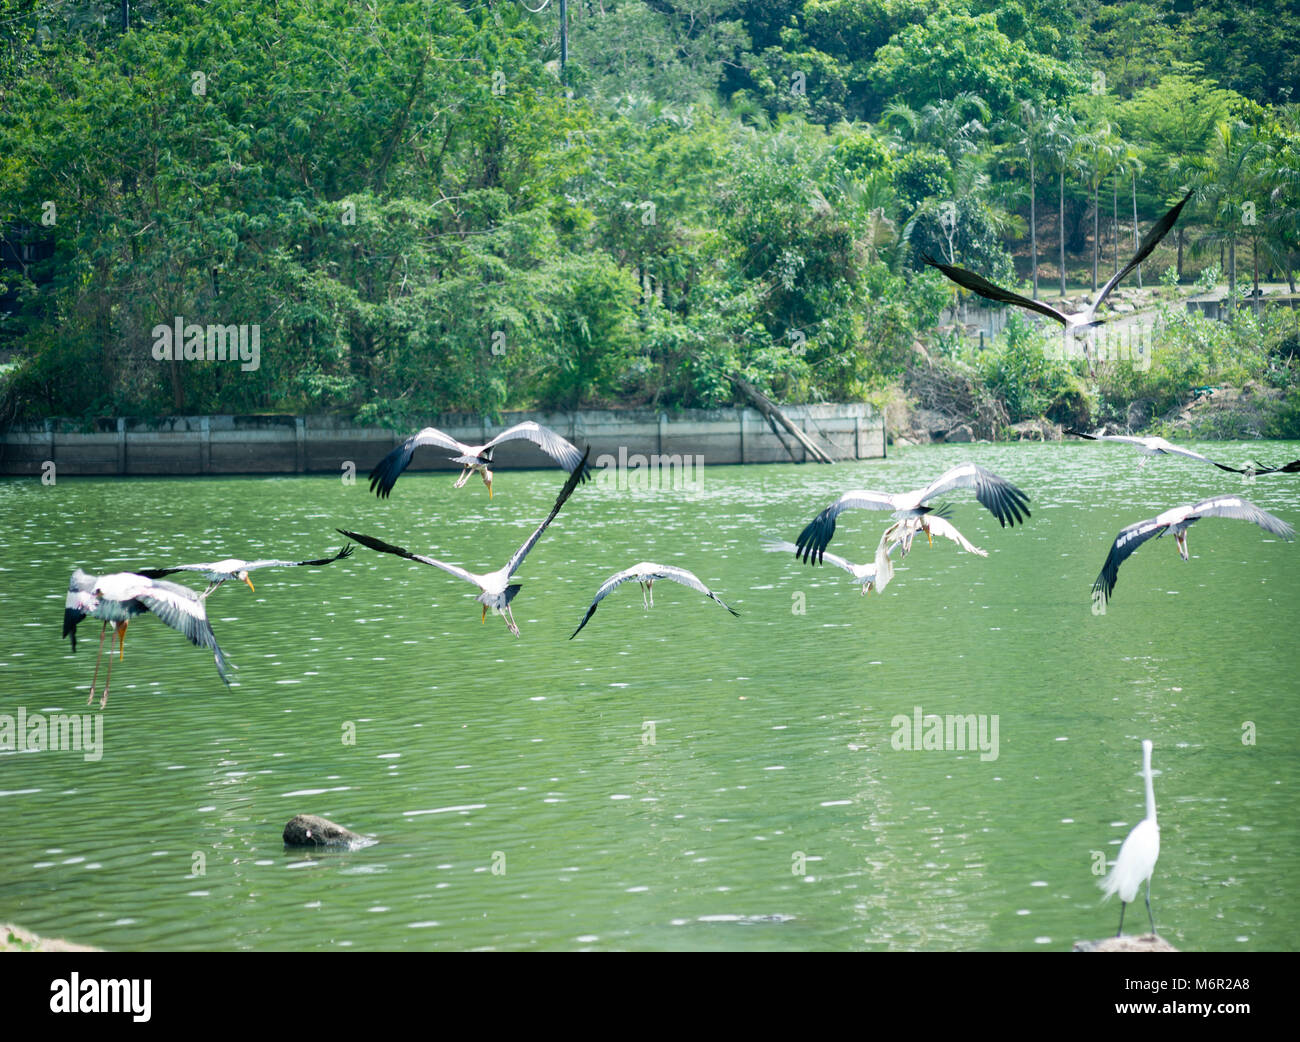 Flying painted storks over lake Stock Photo